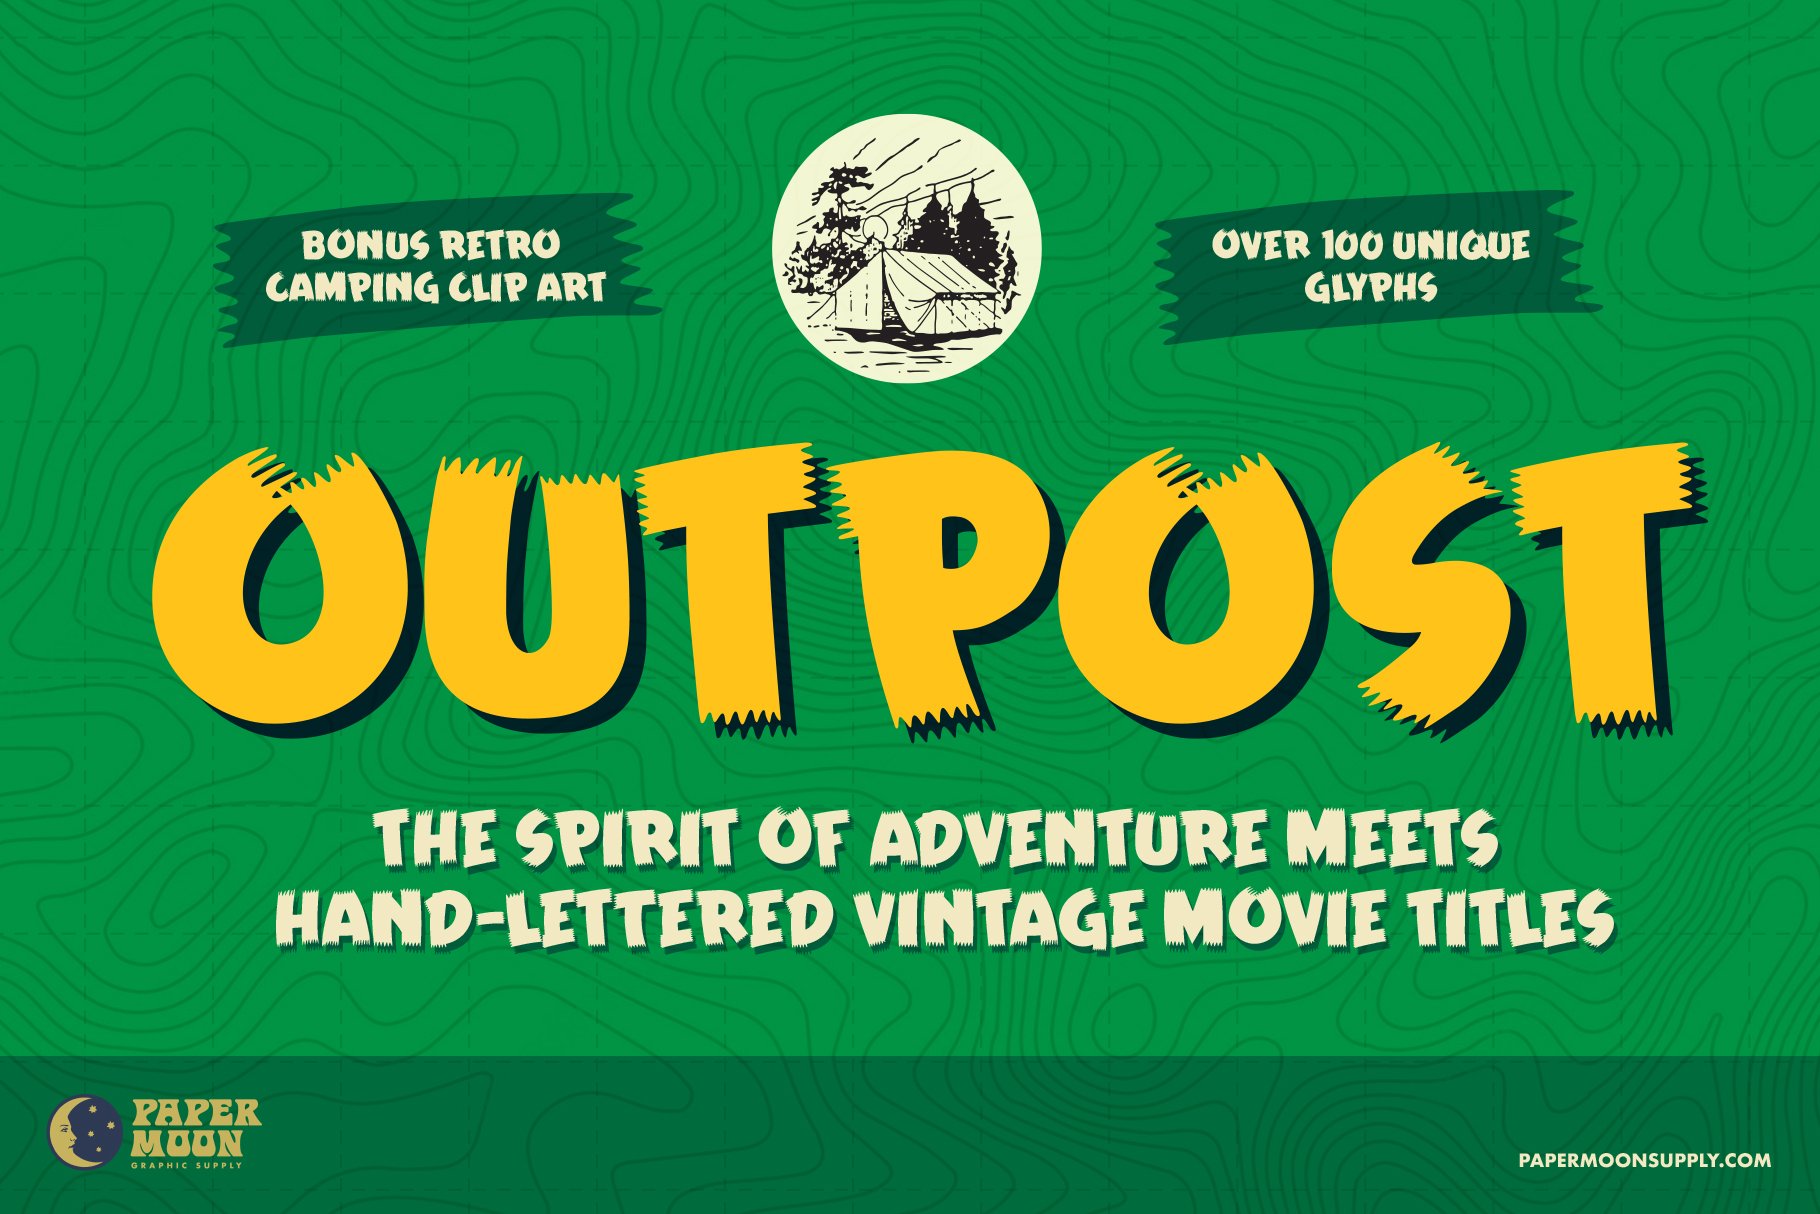 Outpost Retro Brush Font cover image.